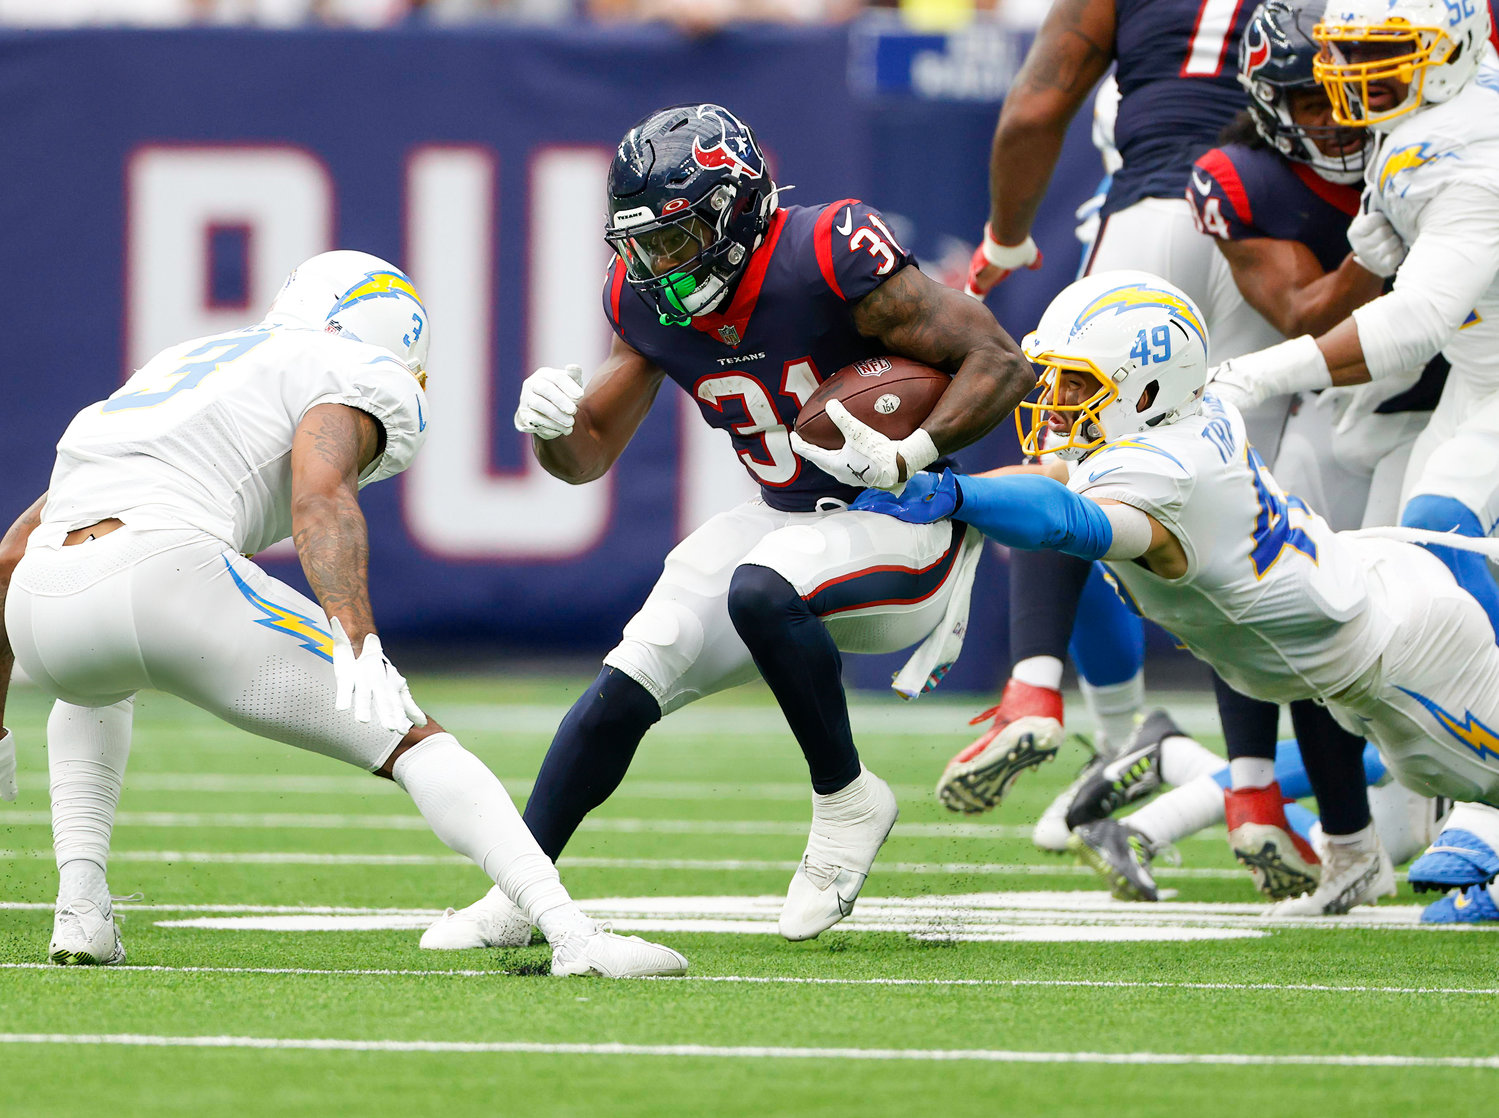 Texans running back Dameon Pierce (31) carries the ball during an NFL game between the Texans and the Chargers on Oct. 2, 2022 in Houston. The Chargers won 34-24.